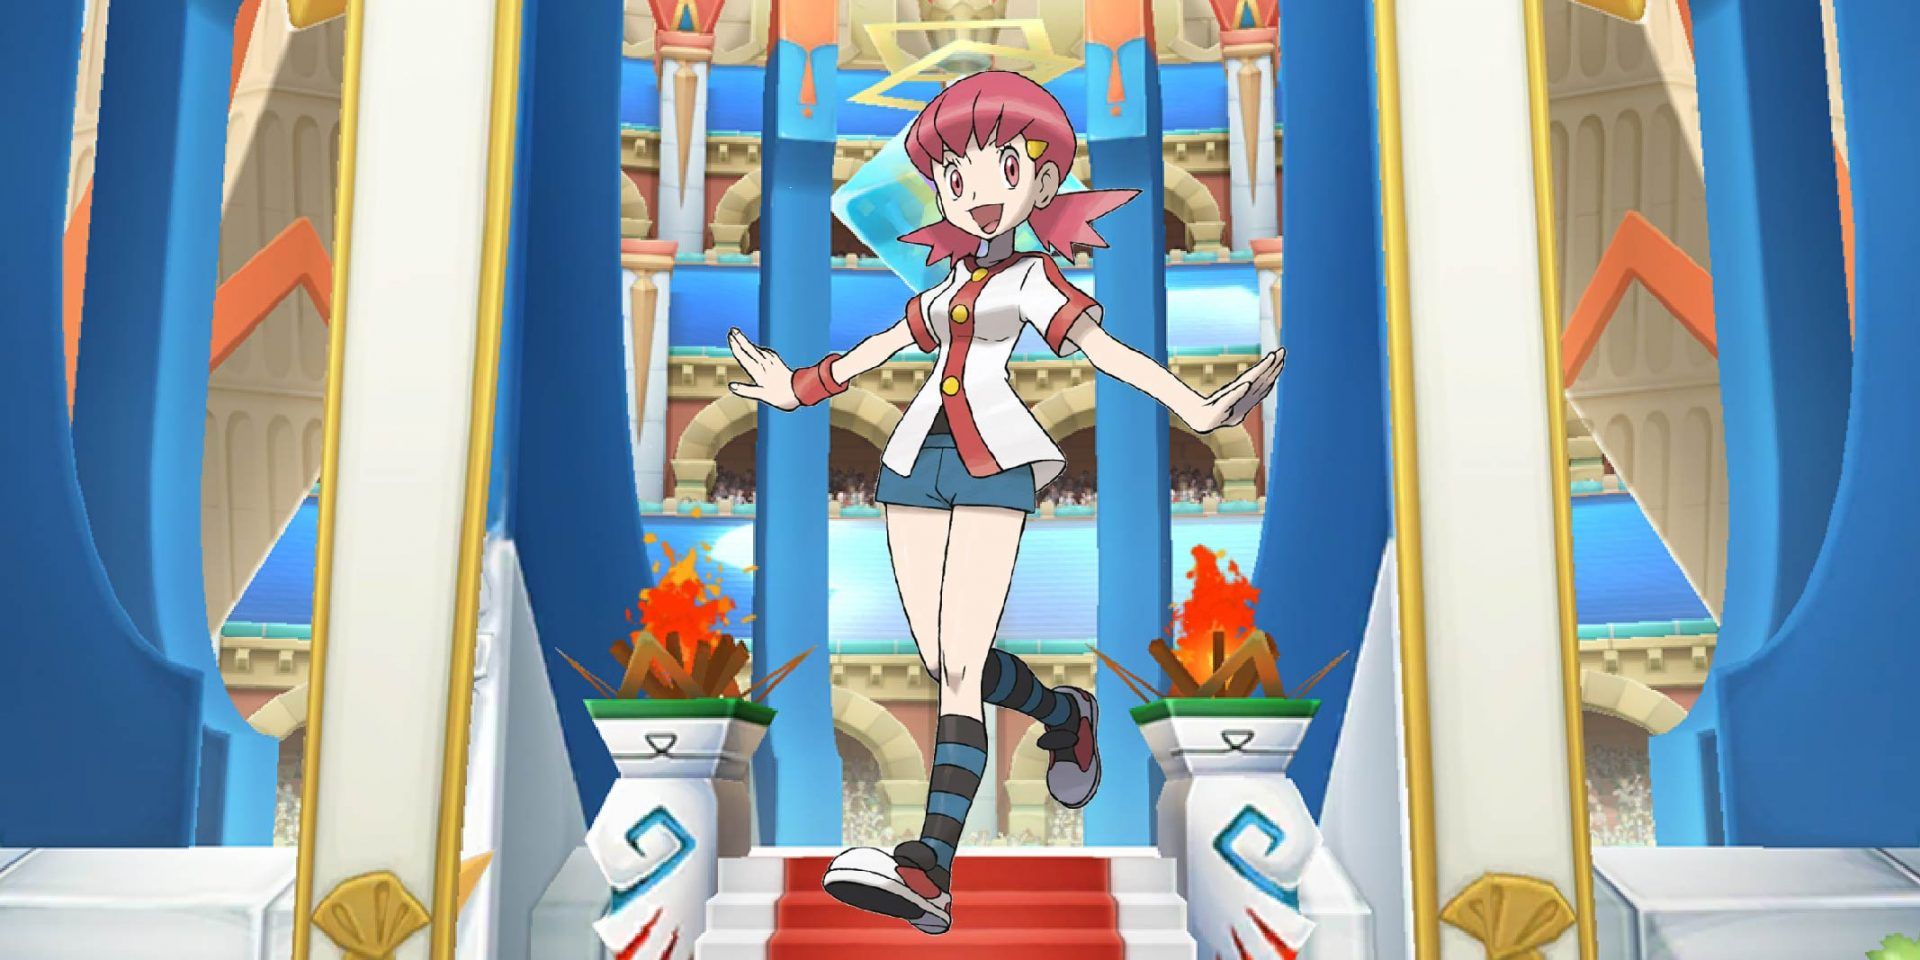 Whitney from Pokémon standing against an arena backdrop.